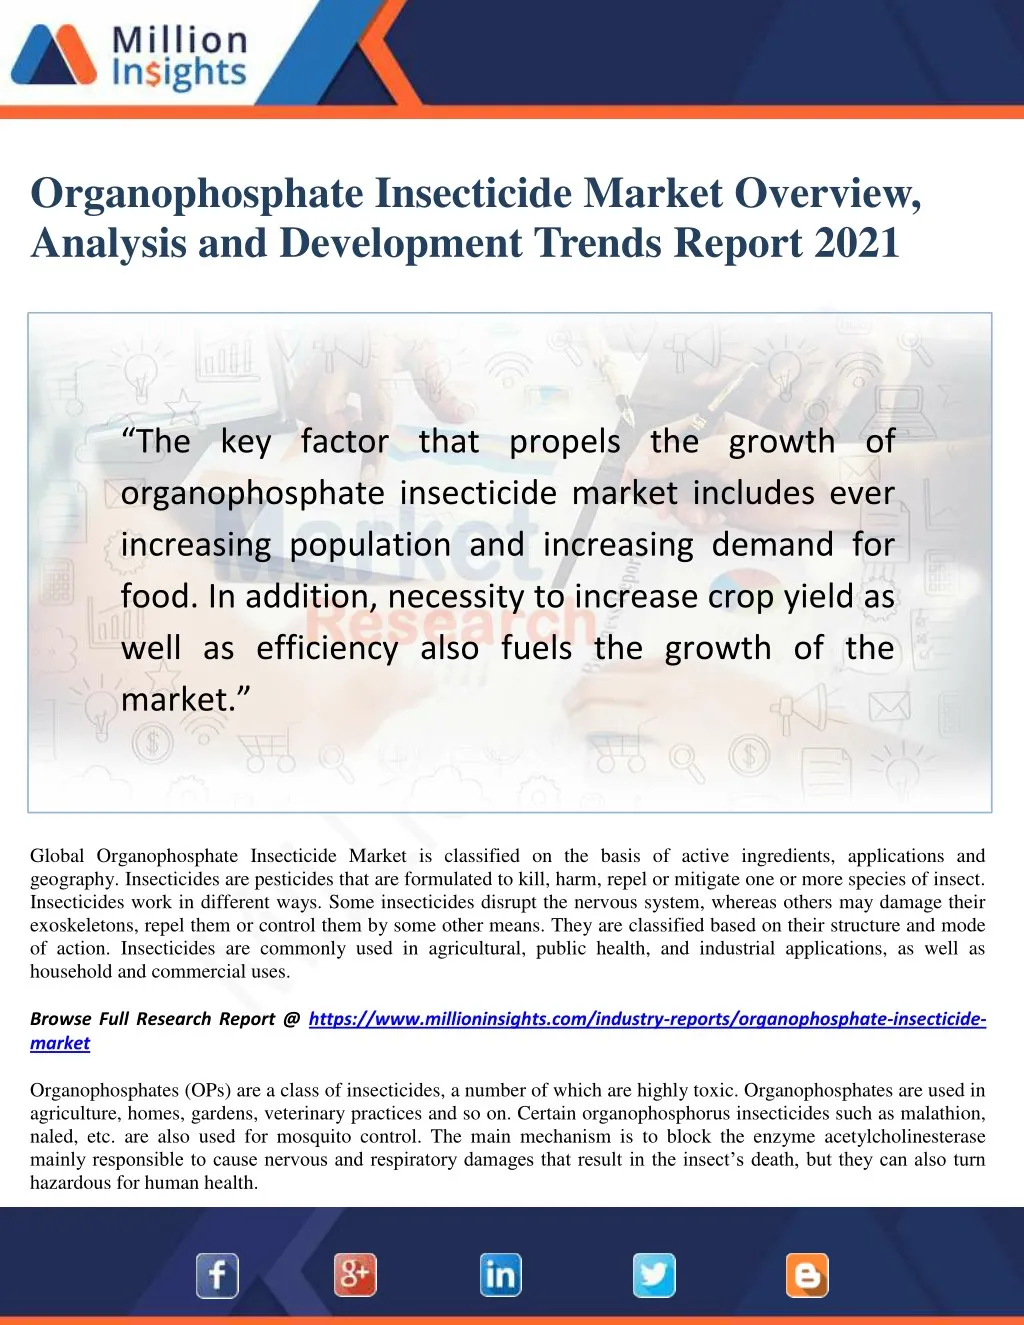 organophosphate insecticide market overview